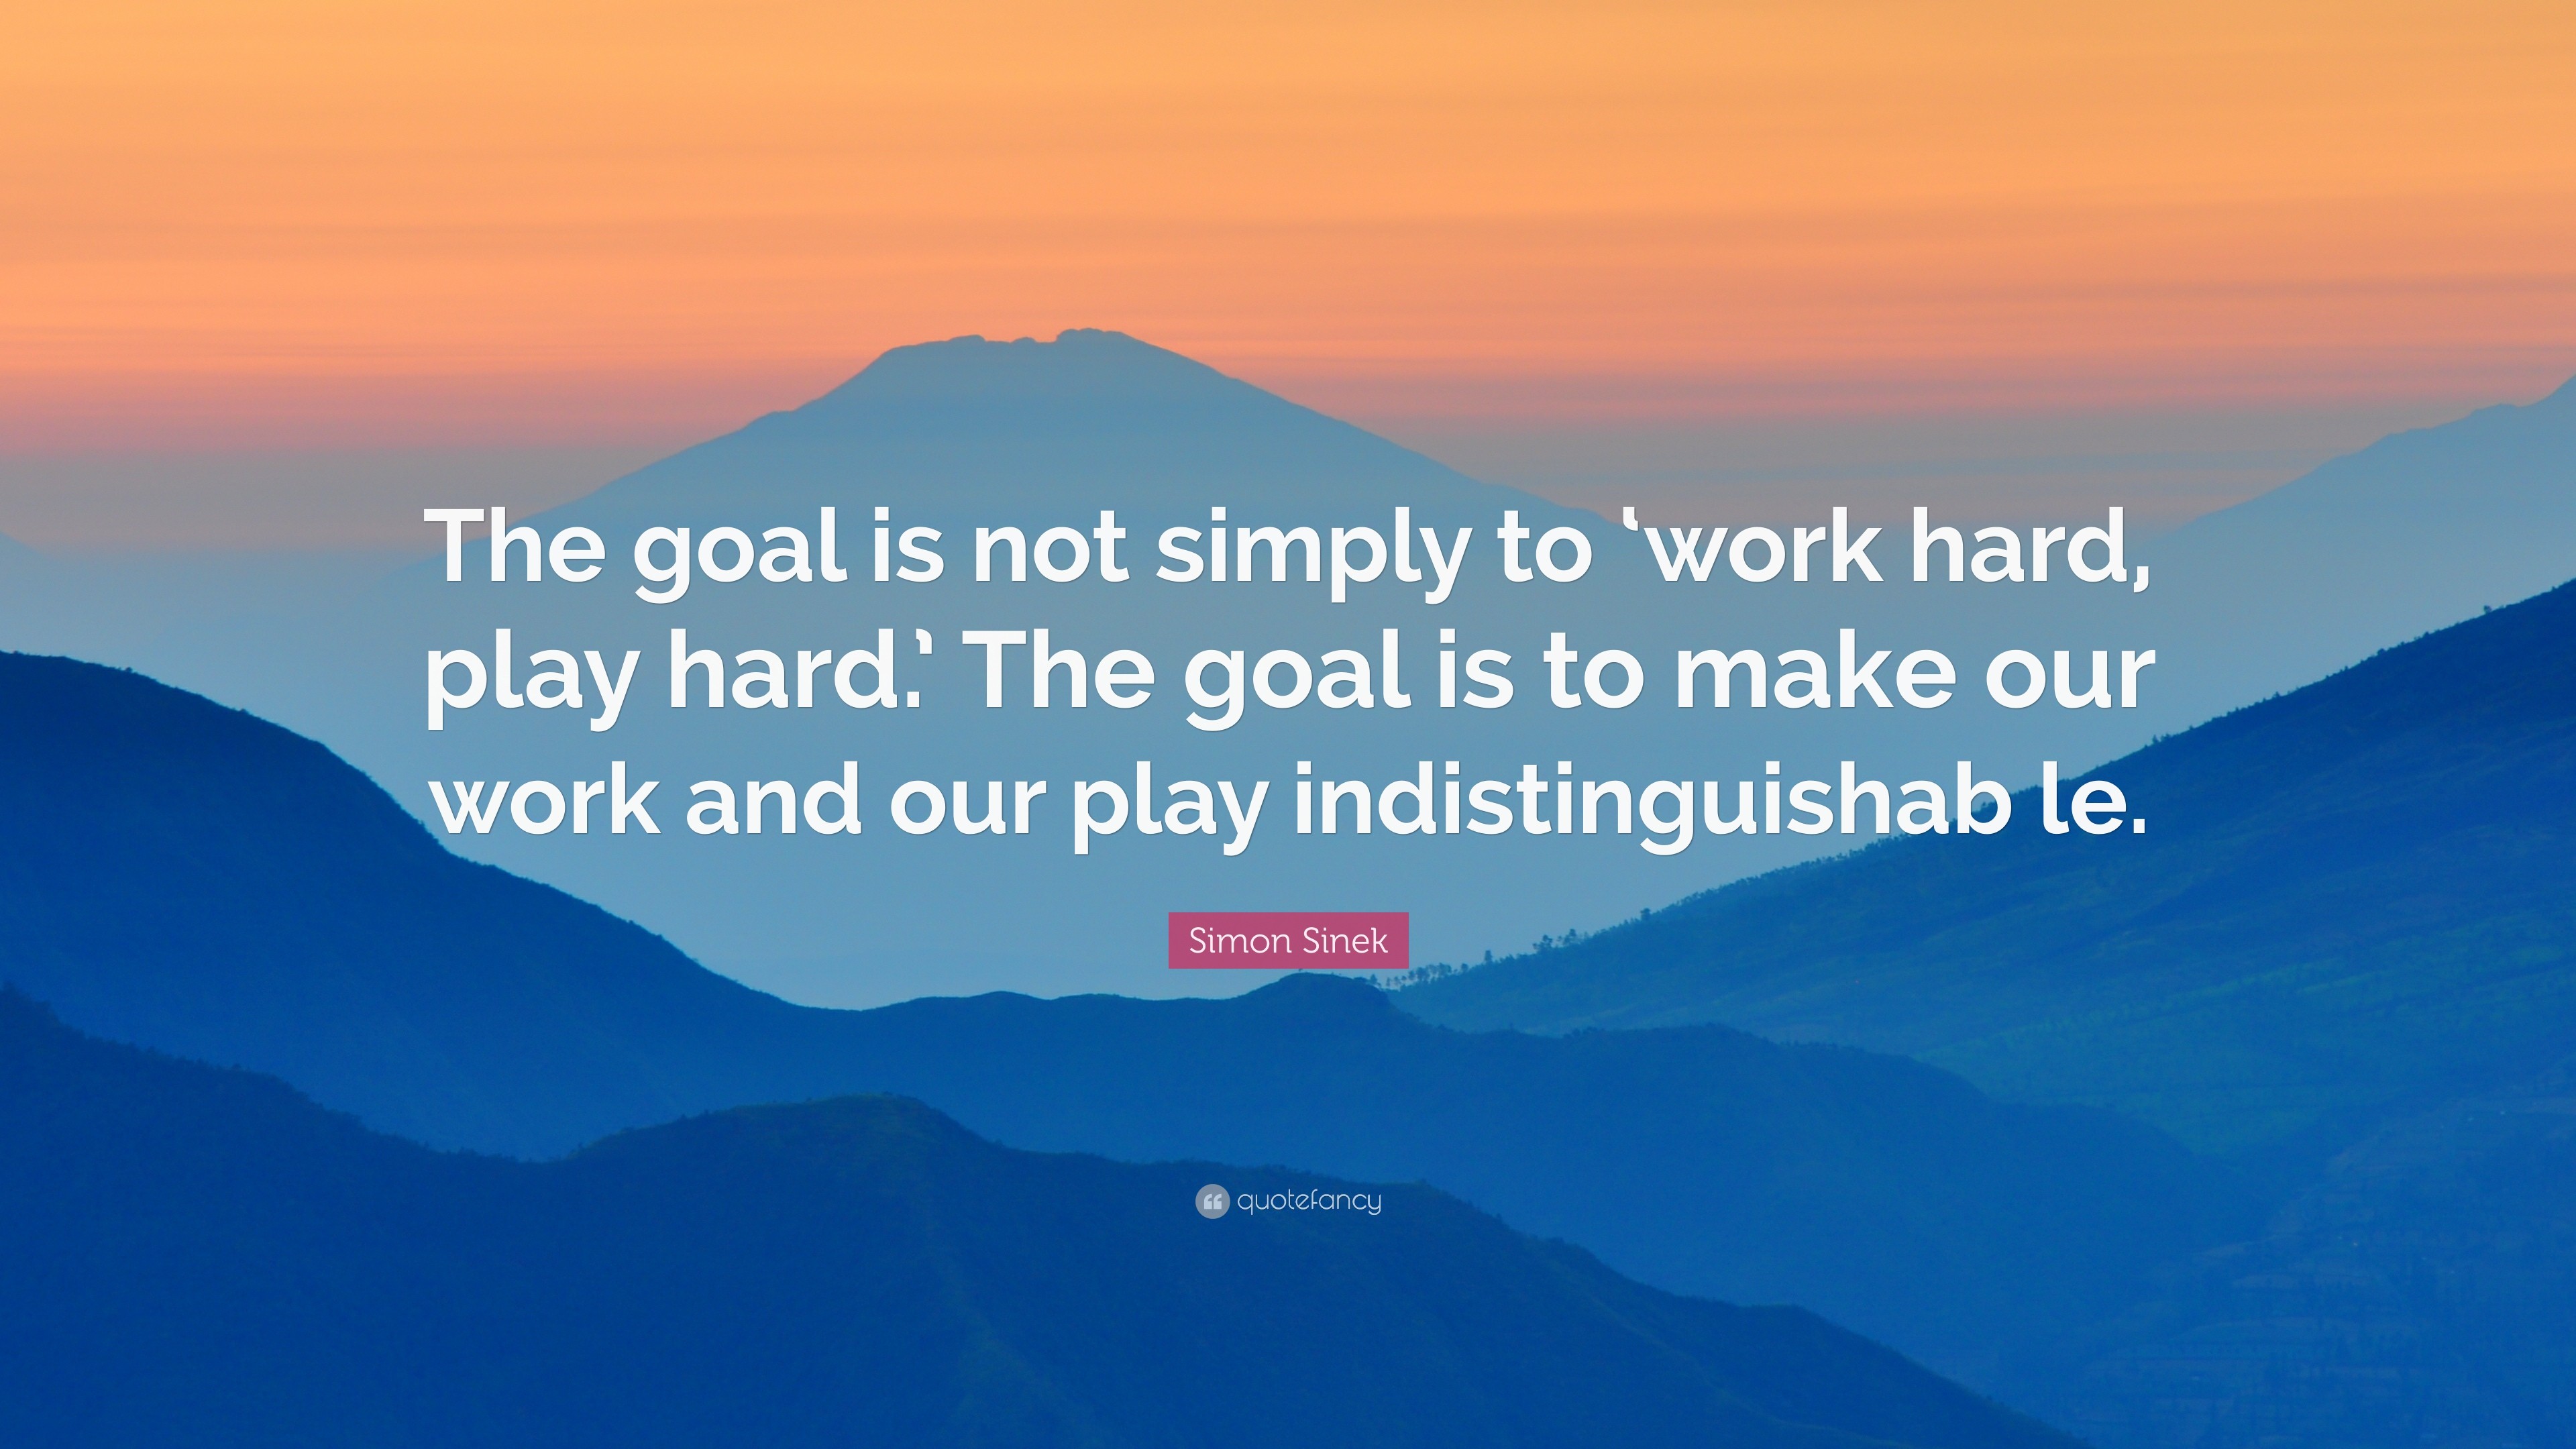 3840x2160 Simon Sinek Quote: “The goal is not simply to 'work hard, play